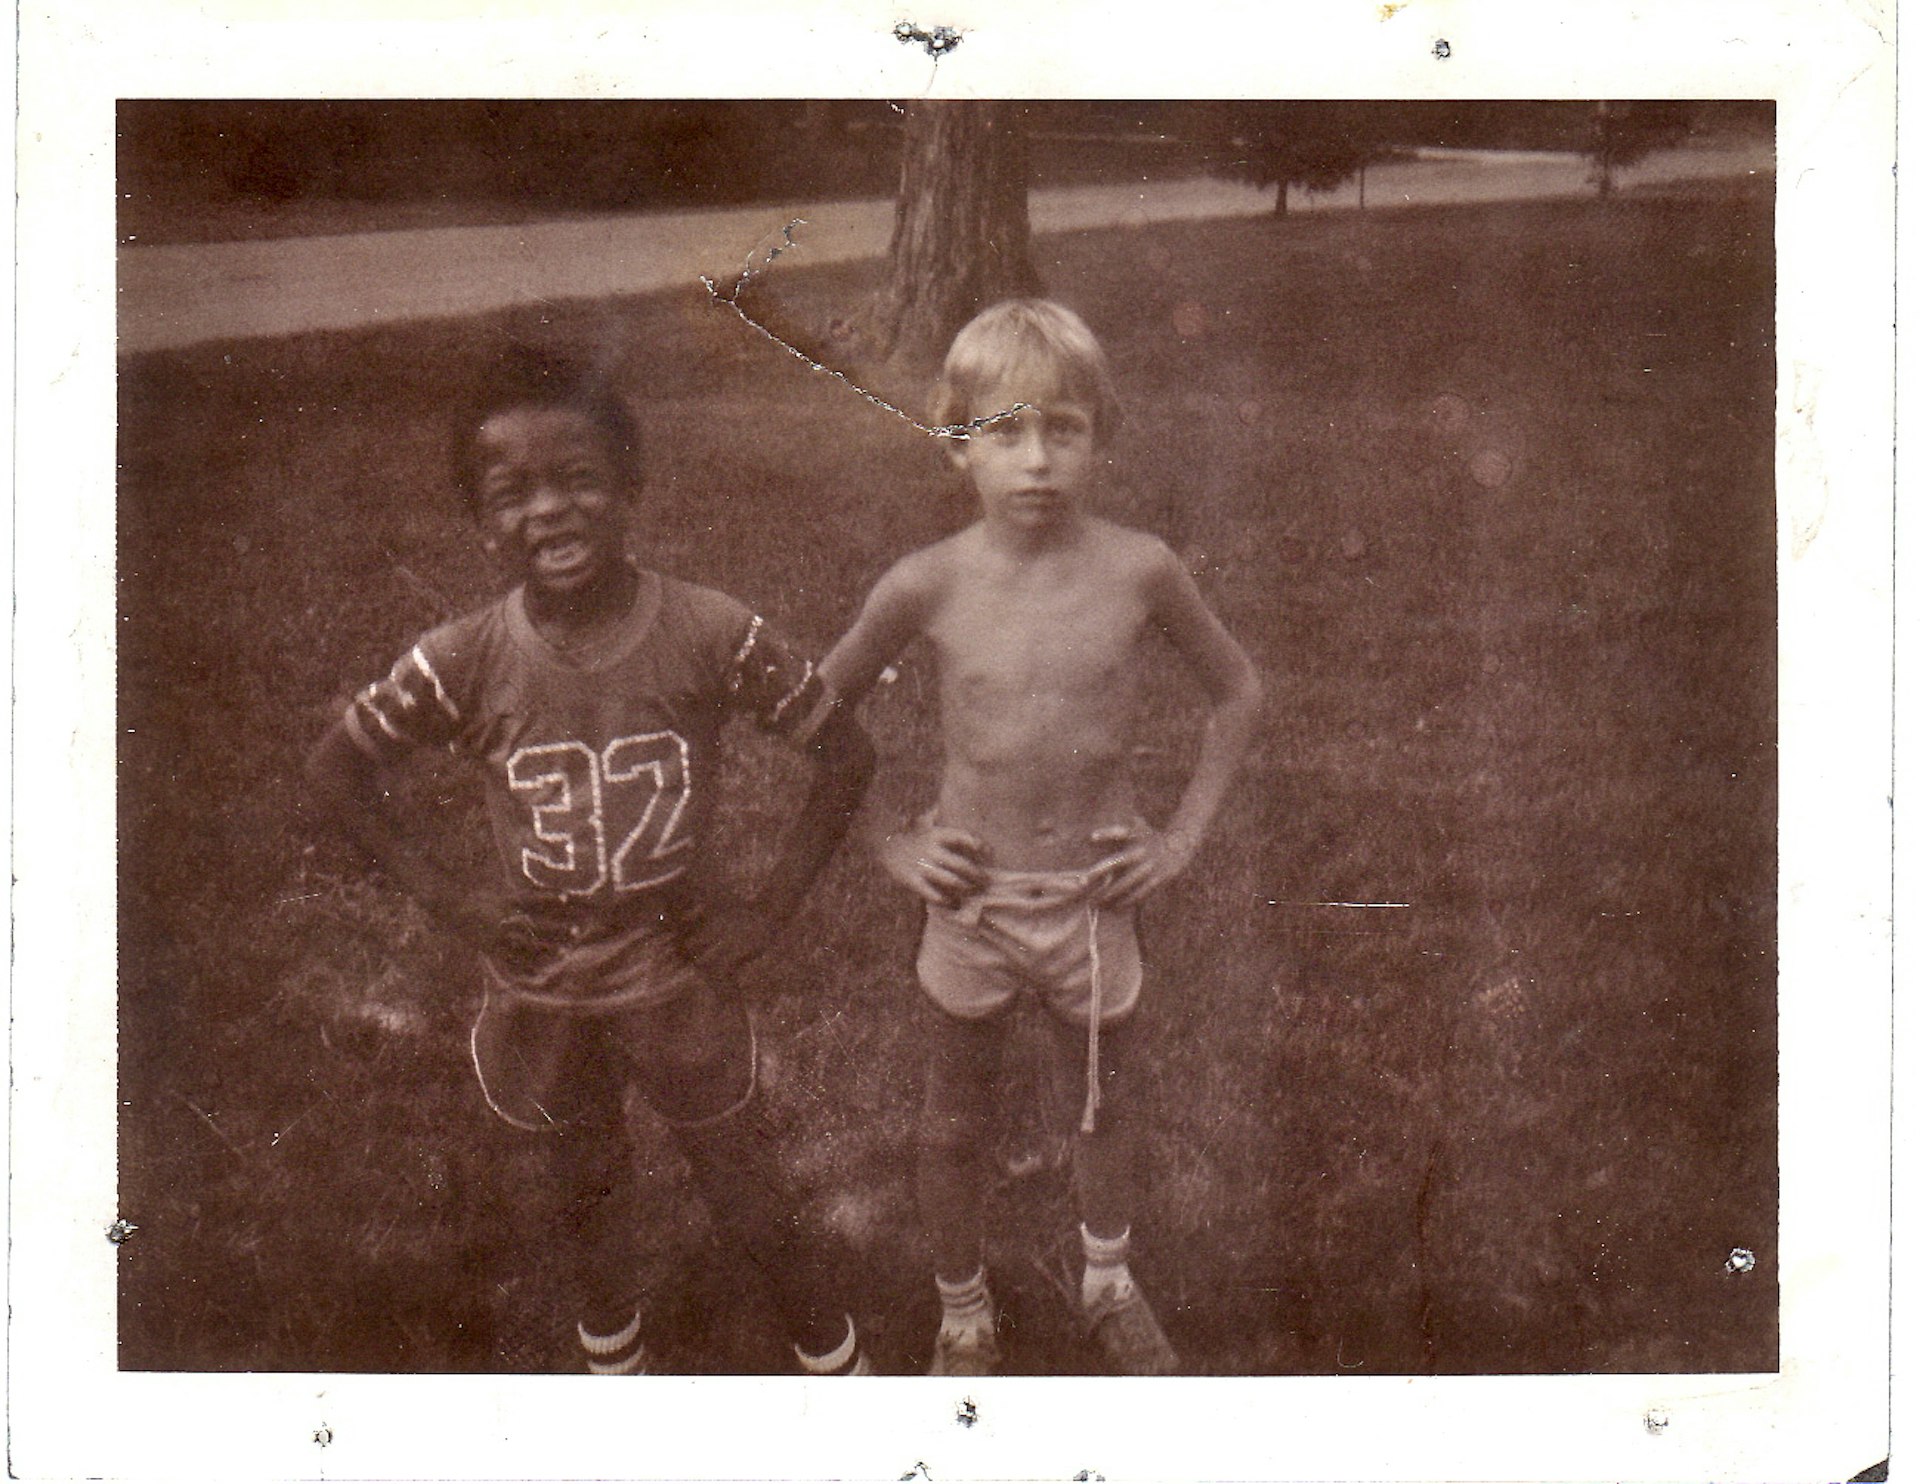 Two young boys in a black-and-white photo